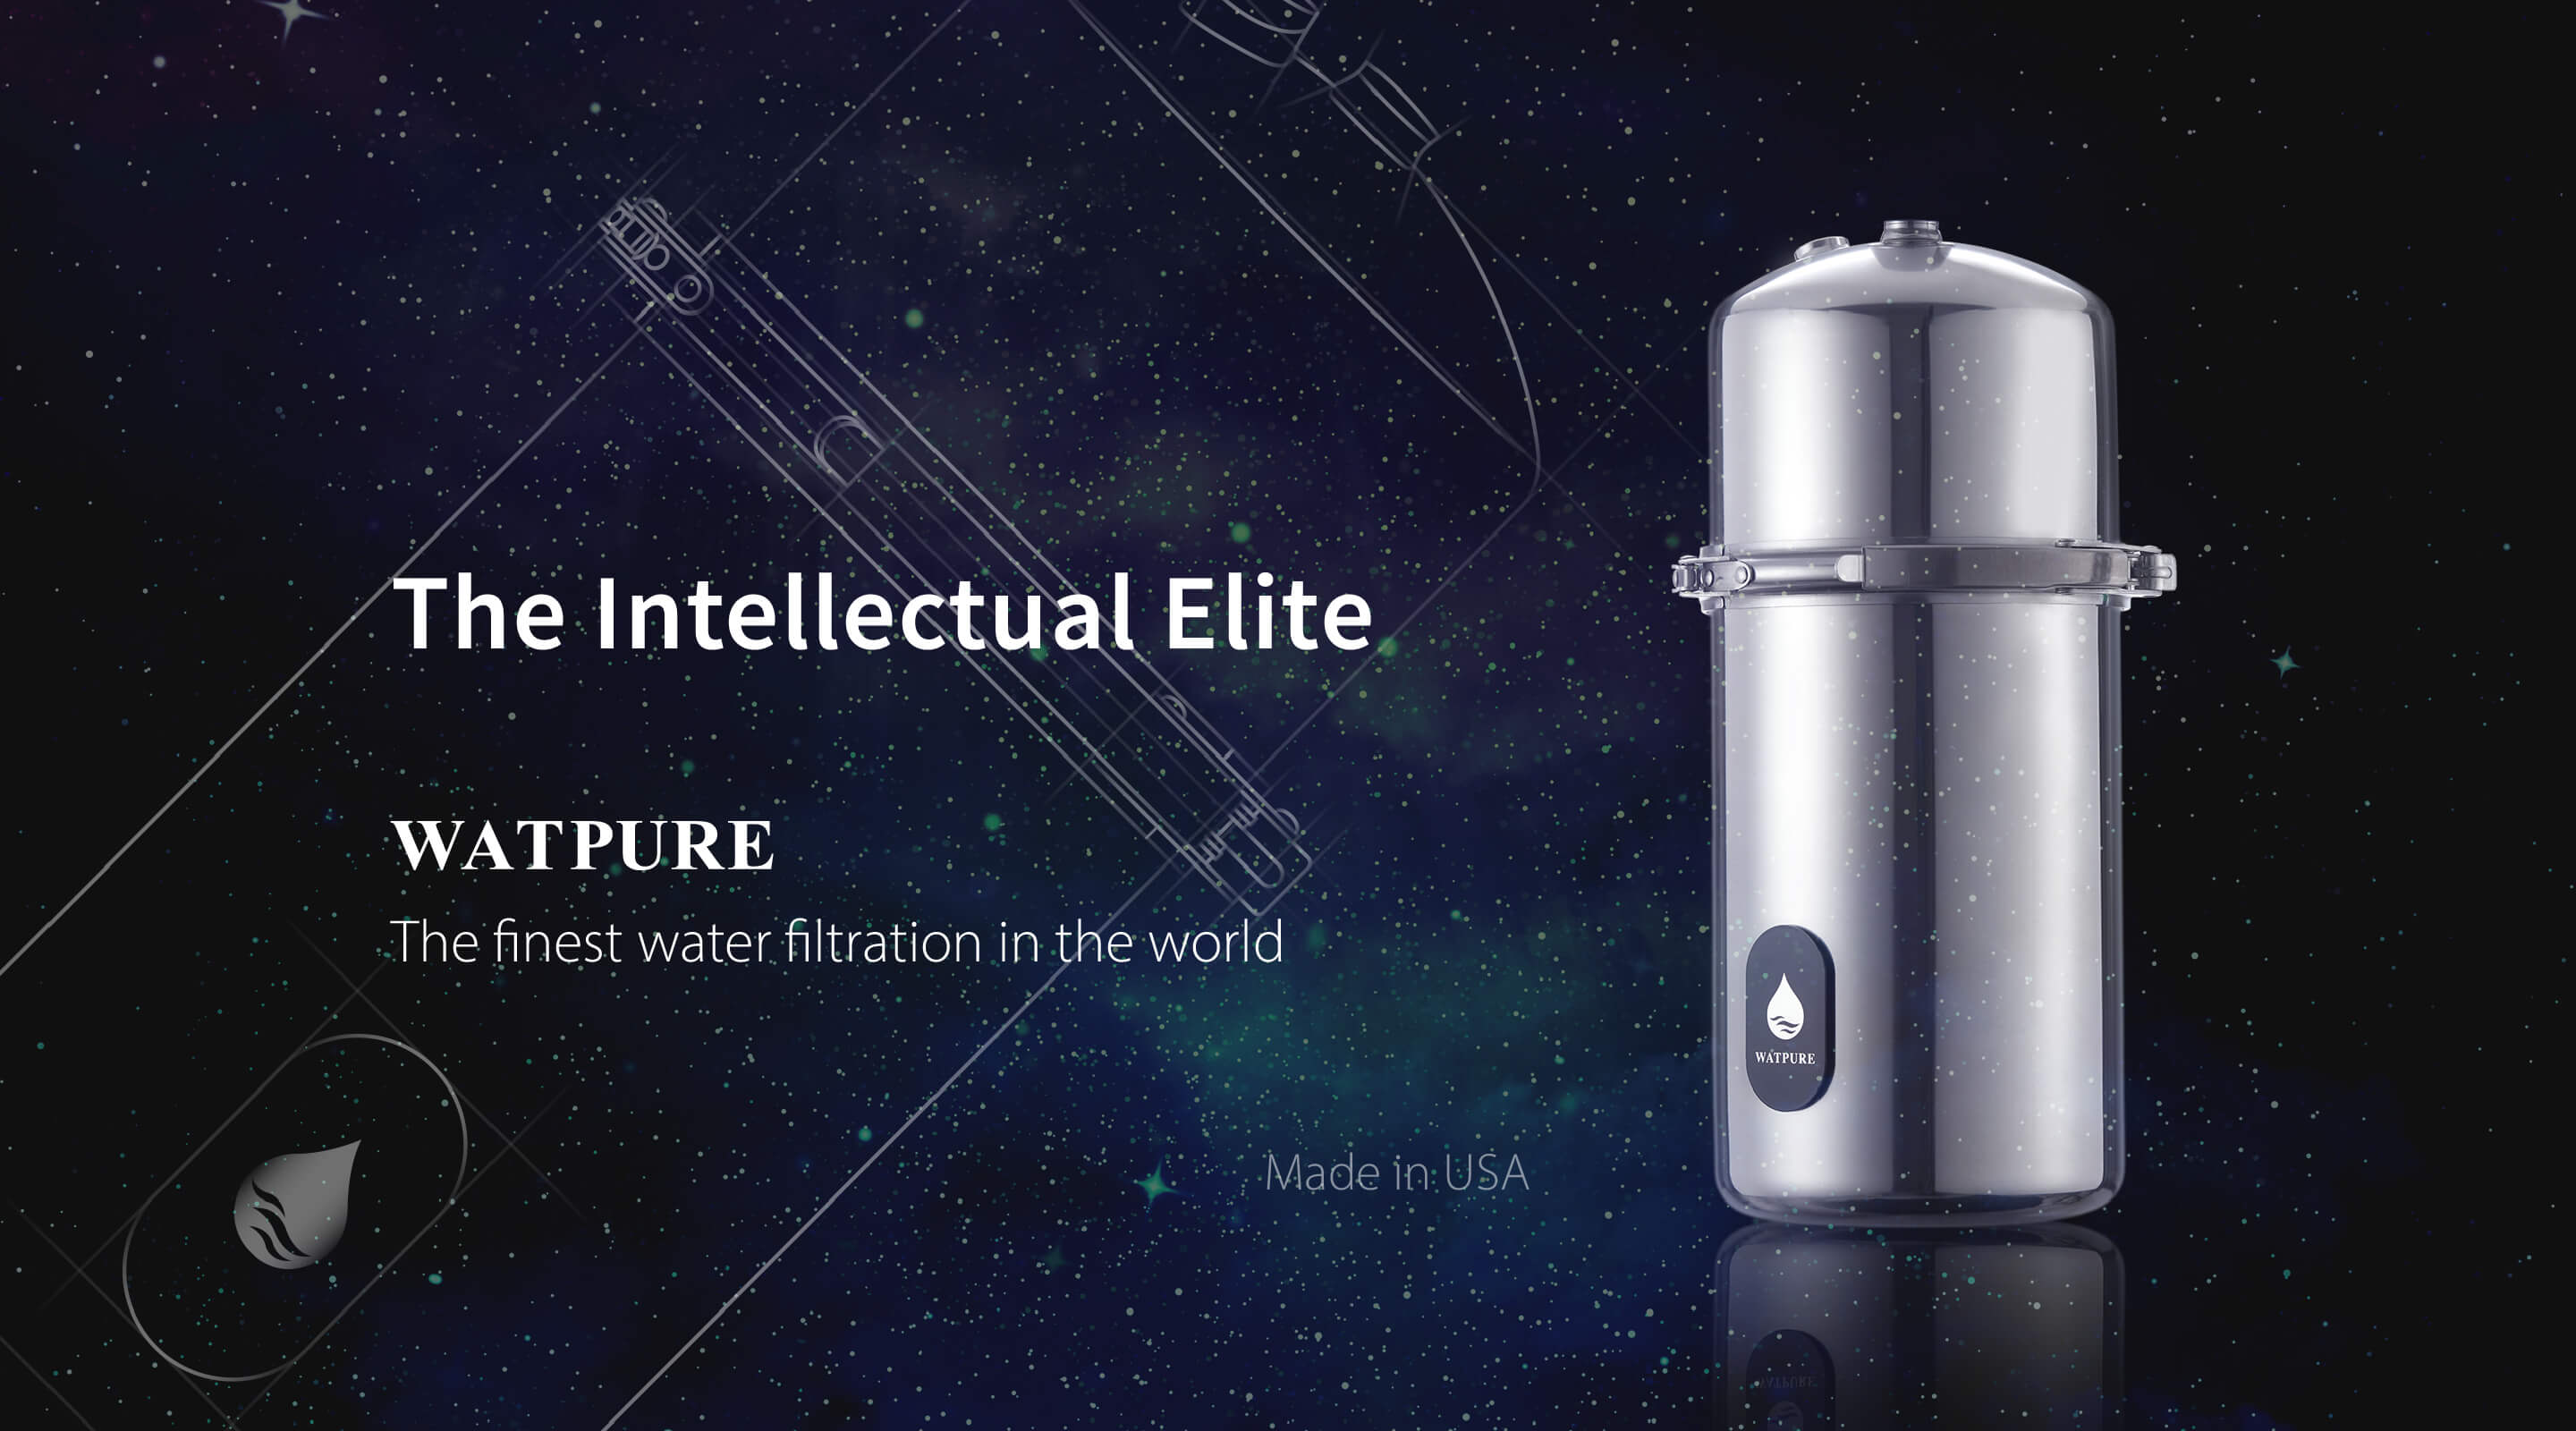 The Intellectual Elite. WATPURE Filtration Systems, W660, Made in USA